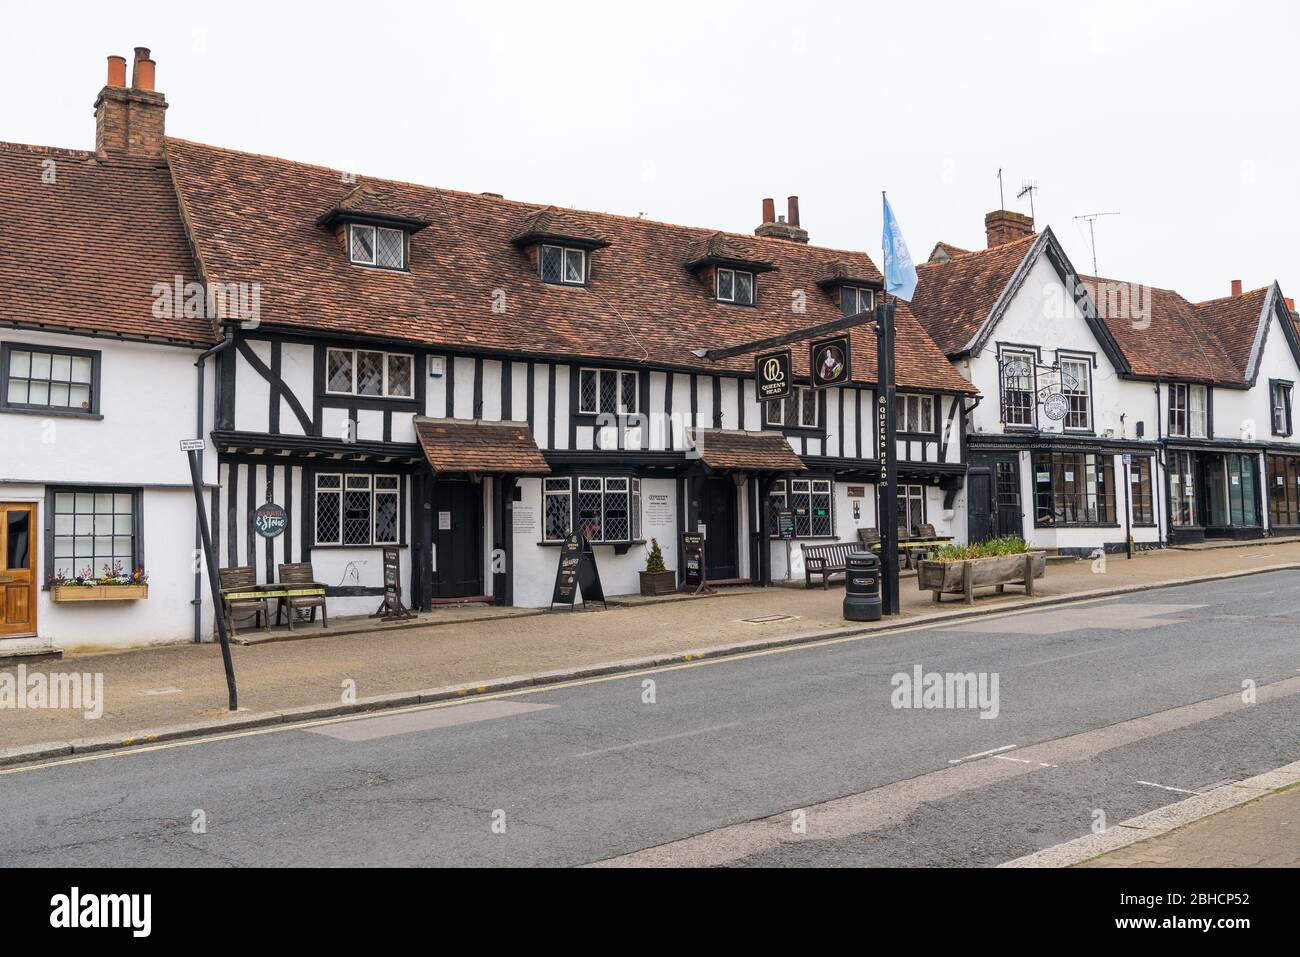 The Queens Head public house, a grade ll listed 16th century Wealden house in Pinner High Street conservation area, Middlesex, England, UK Stock Photo